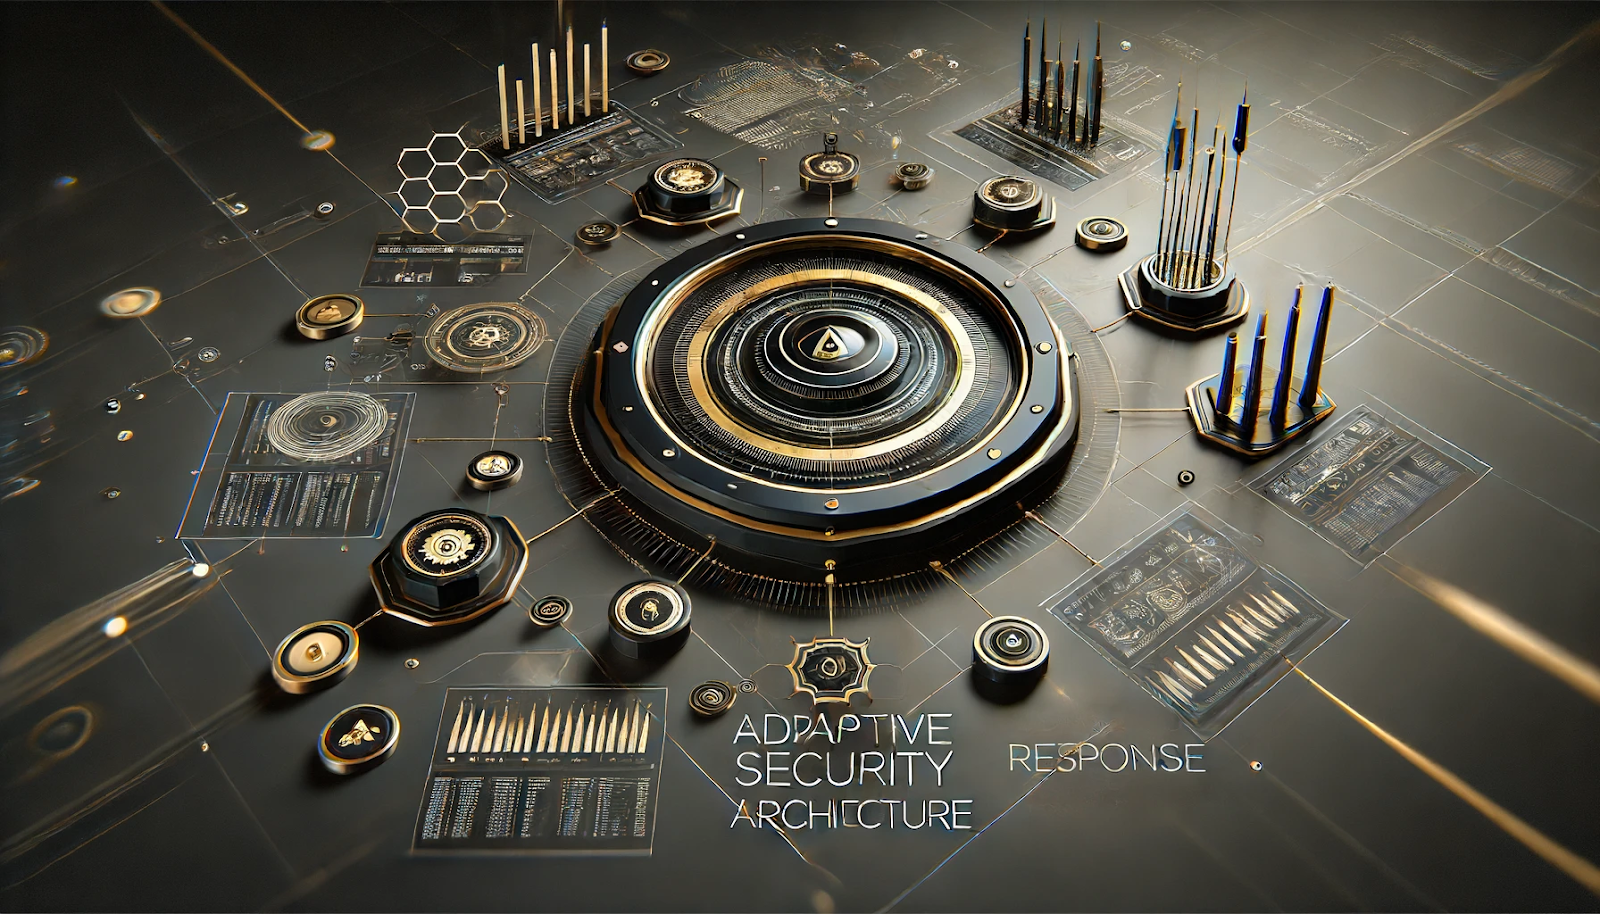 A symbolic representation of adaptive security architecture featuring a sleek black and gold design.  